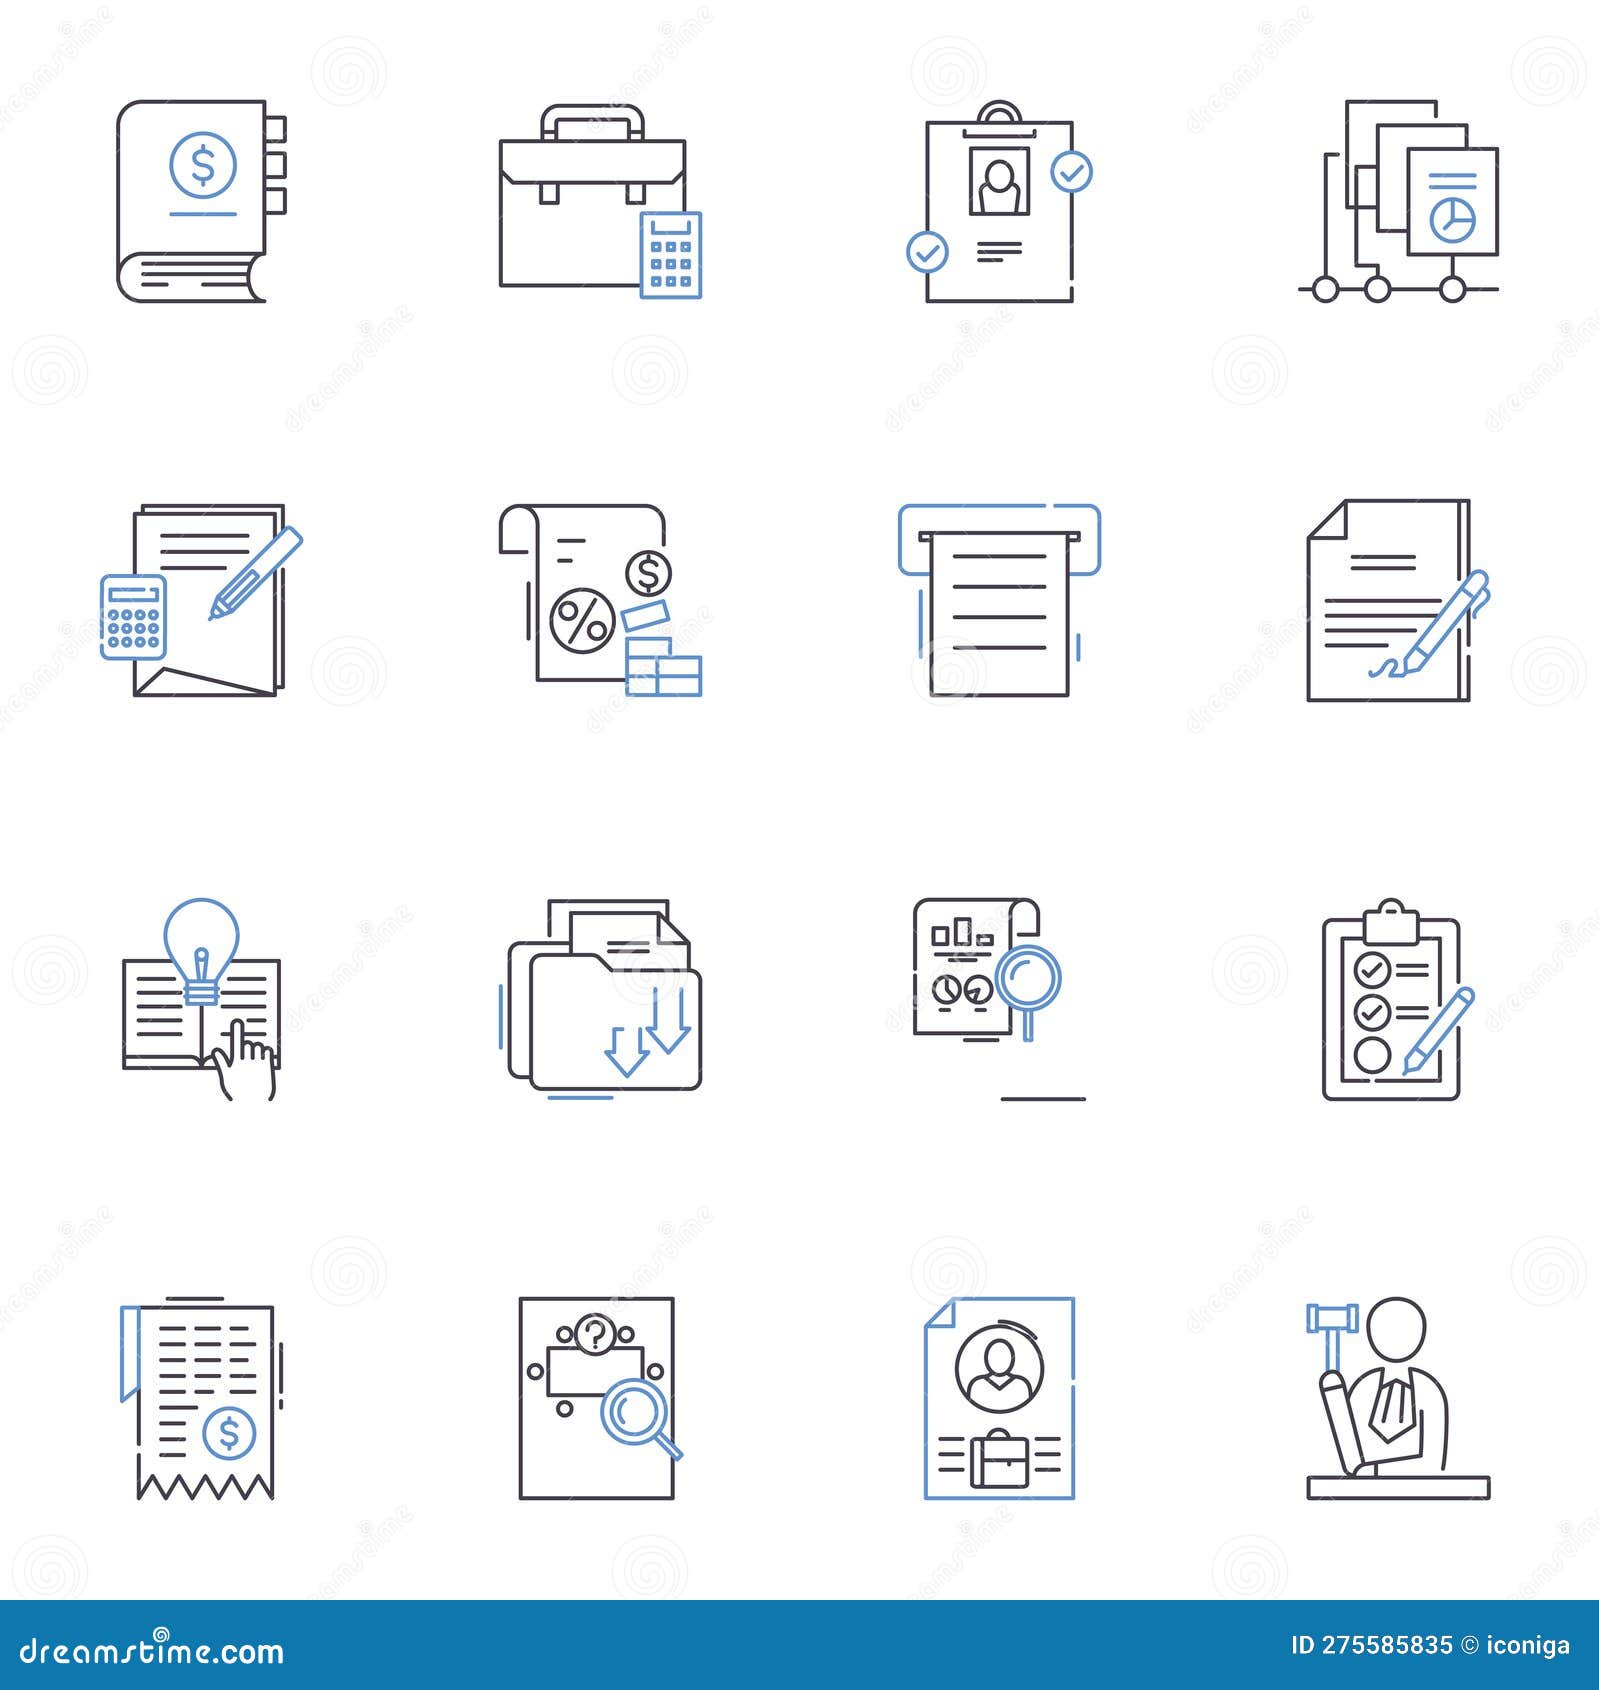 legal team line icons collection. lawyers, advocates, attorneys, counselors, barristers, lawmakers, jurists  and